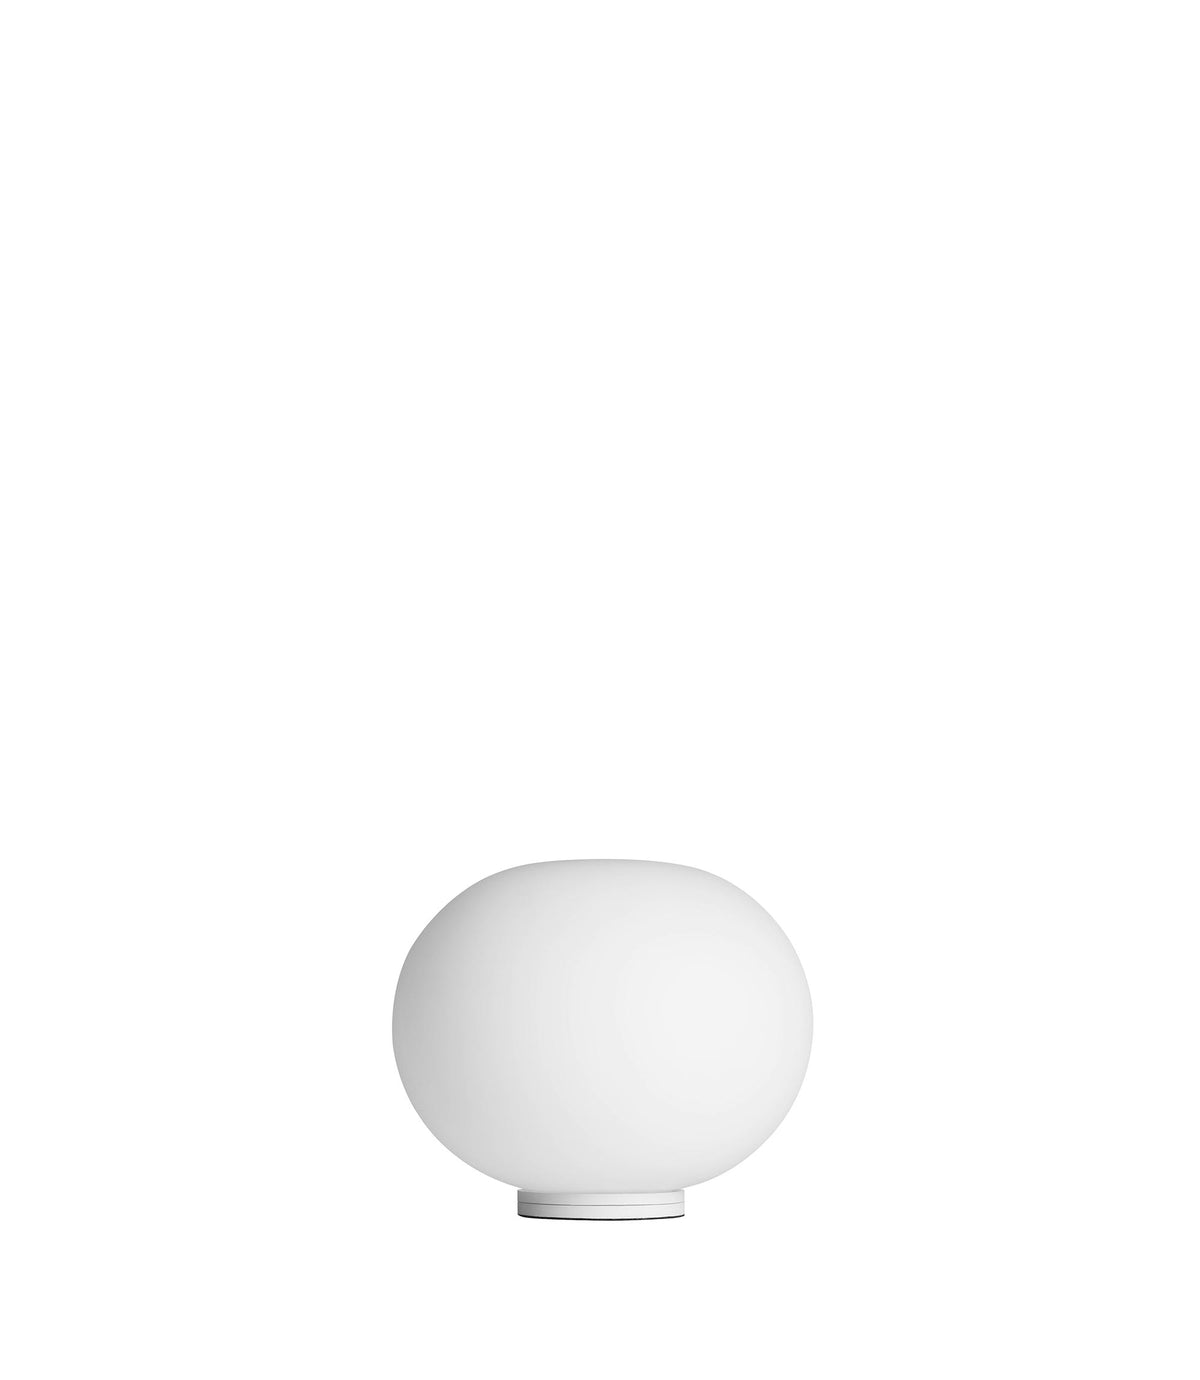 Glo-Ball Basic Zero Table Lamp by Flos